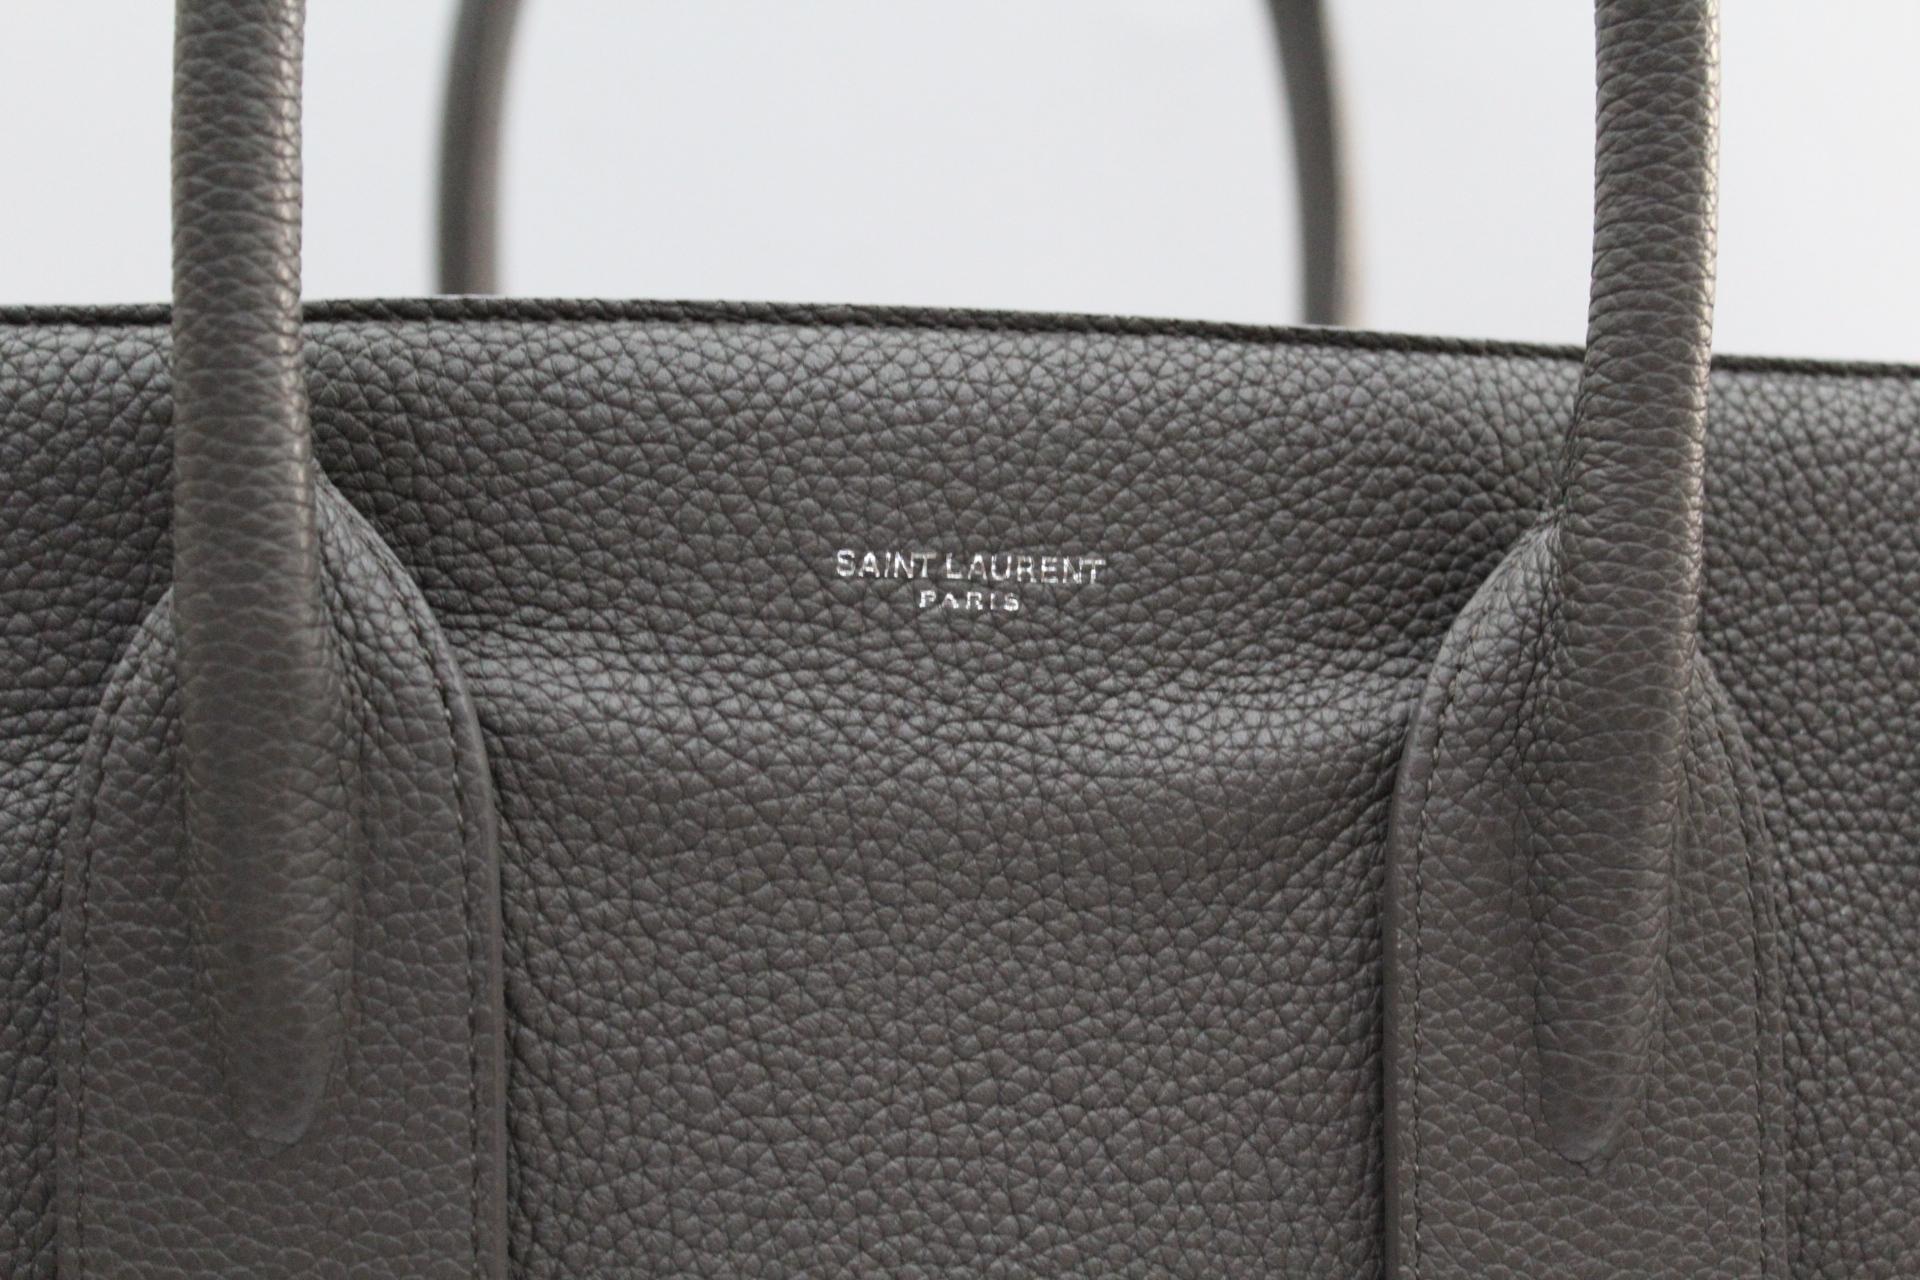 
Saint Laurent Sac De Jour Souple bag in asphalt-colored textured leather. Elegance and simplicity this bag is a real jewel that will embellish every outfit. It is equipped with a long removable shoulder strap in leather. Internally, it has a